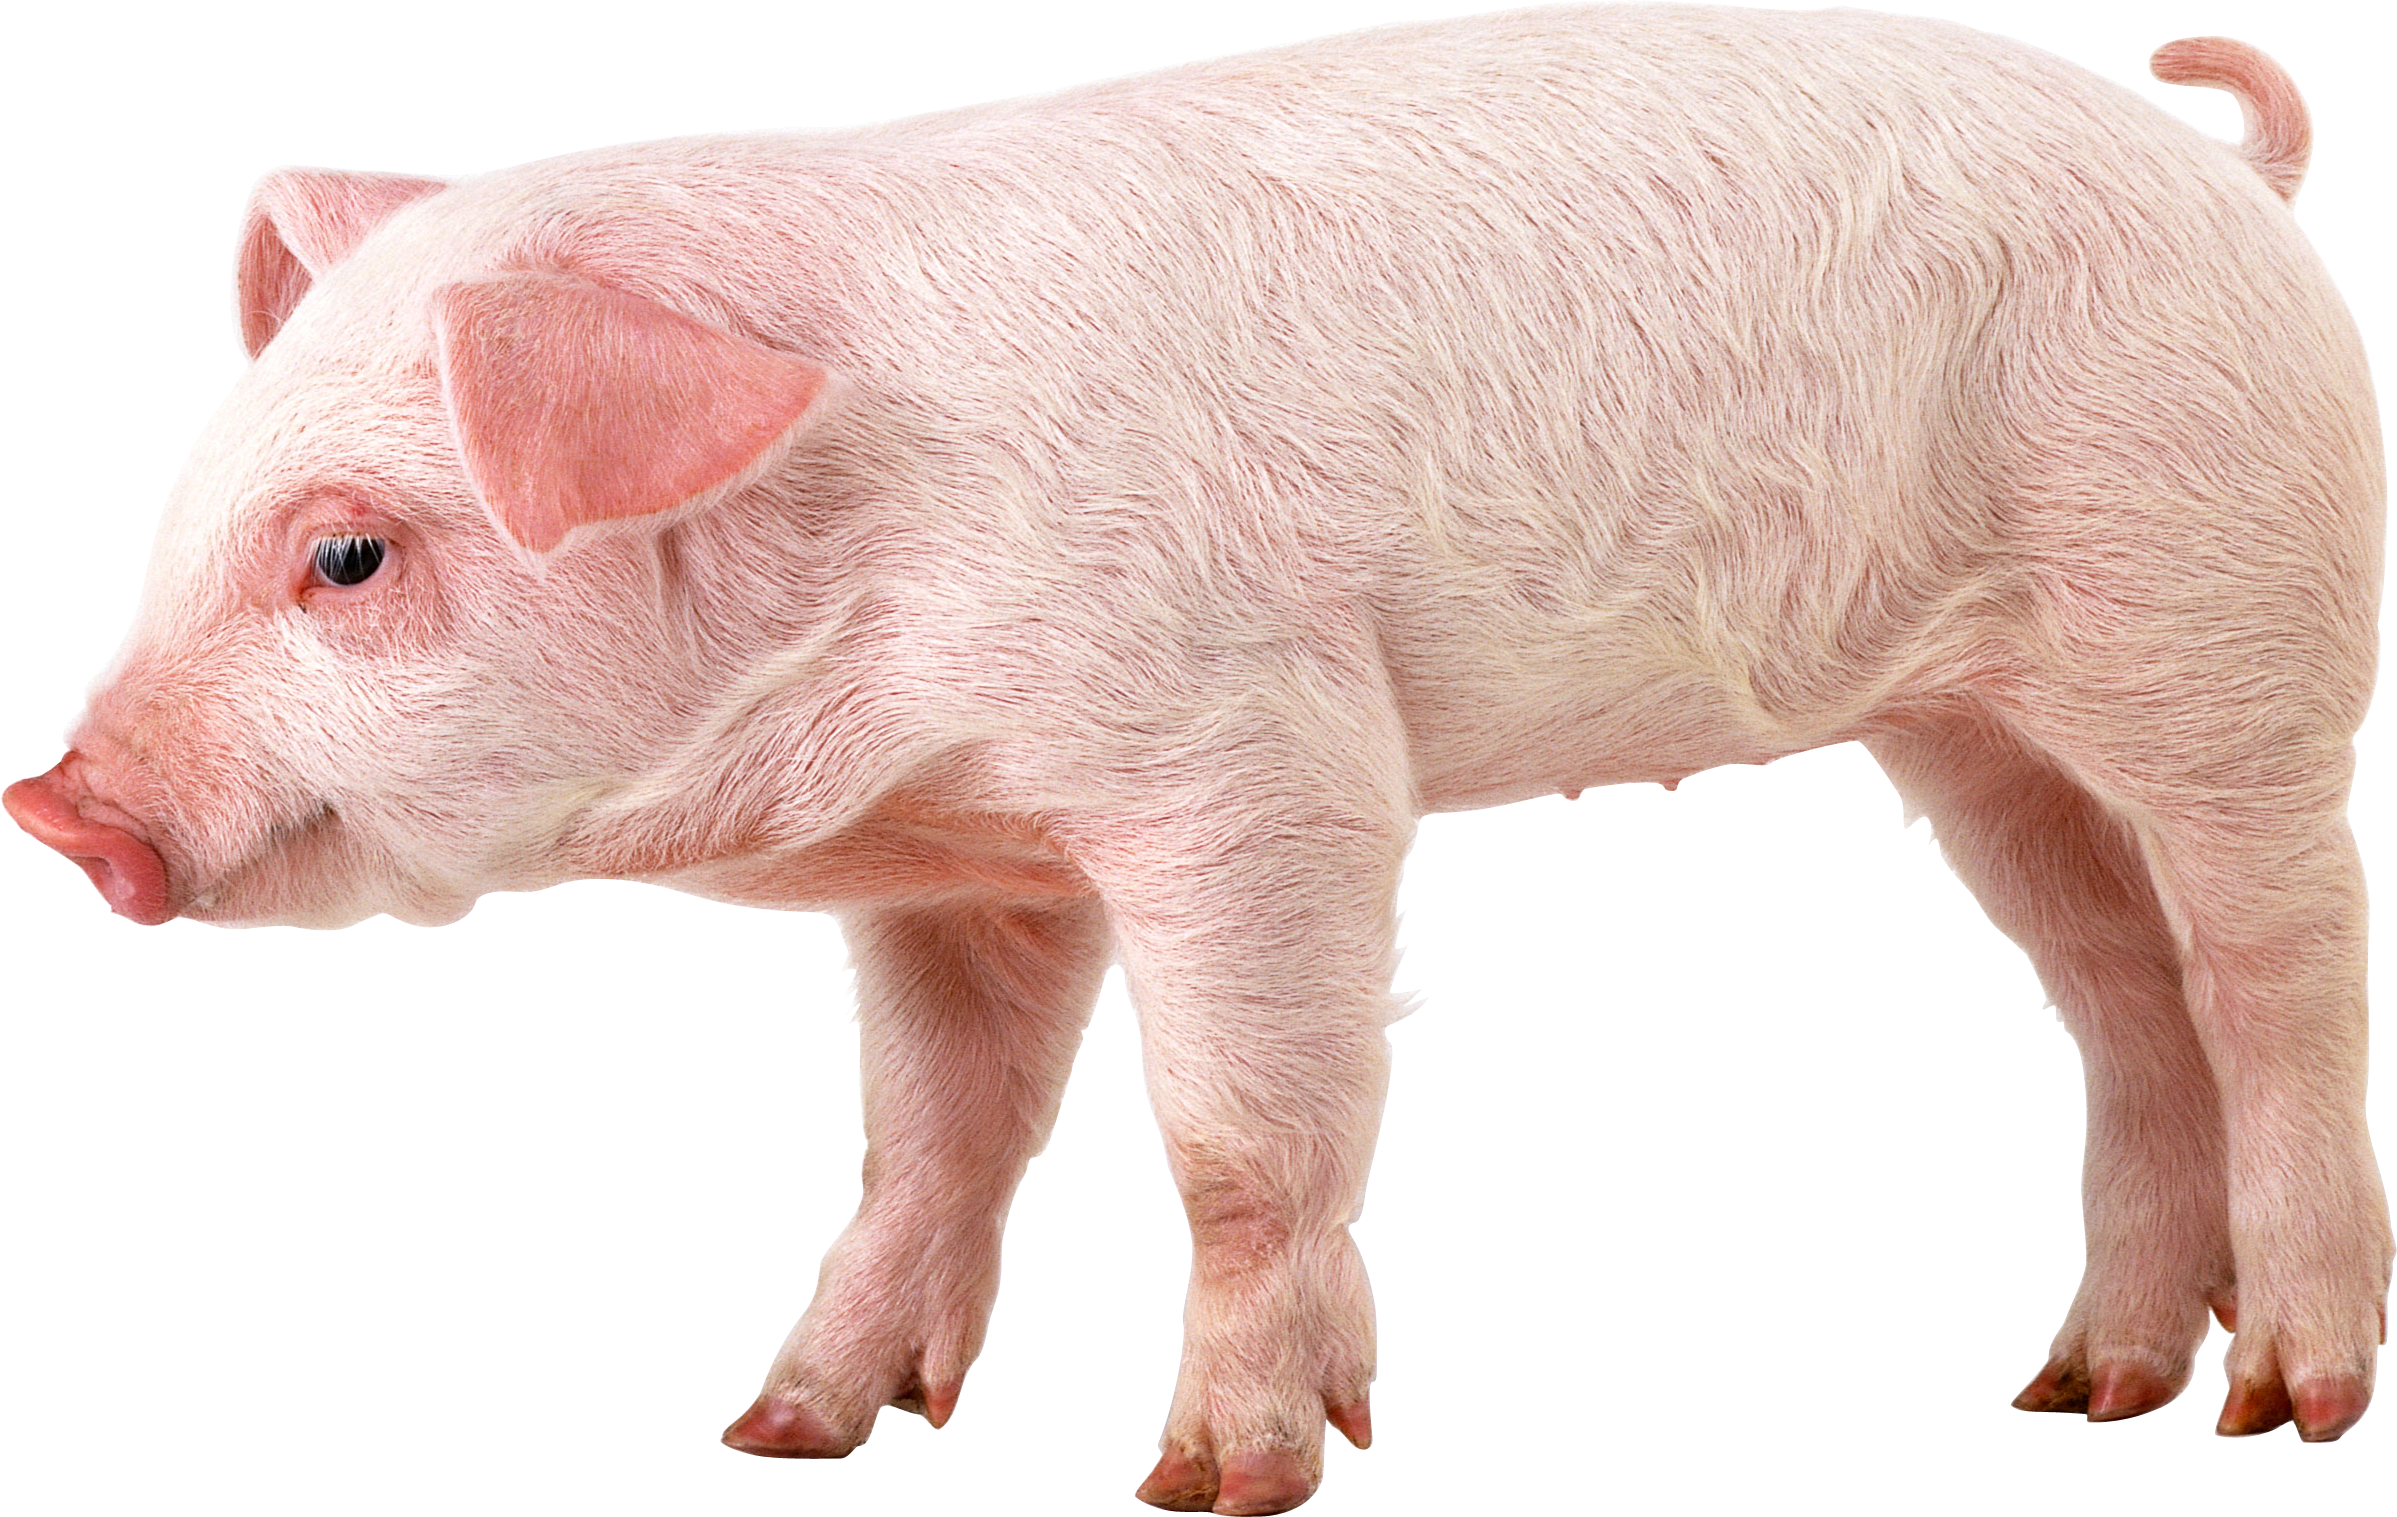 Pig png images free. Hog clipart common animal